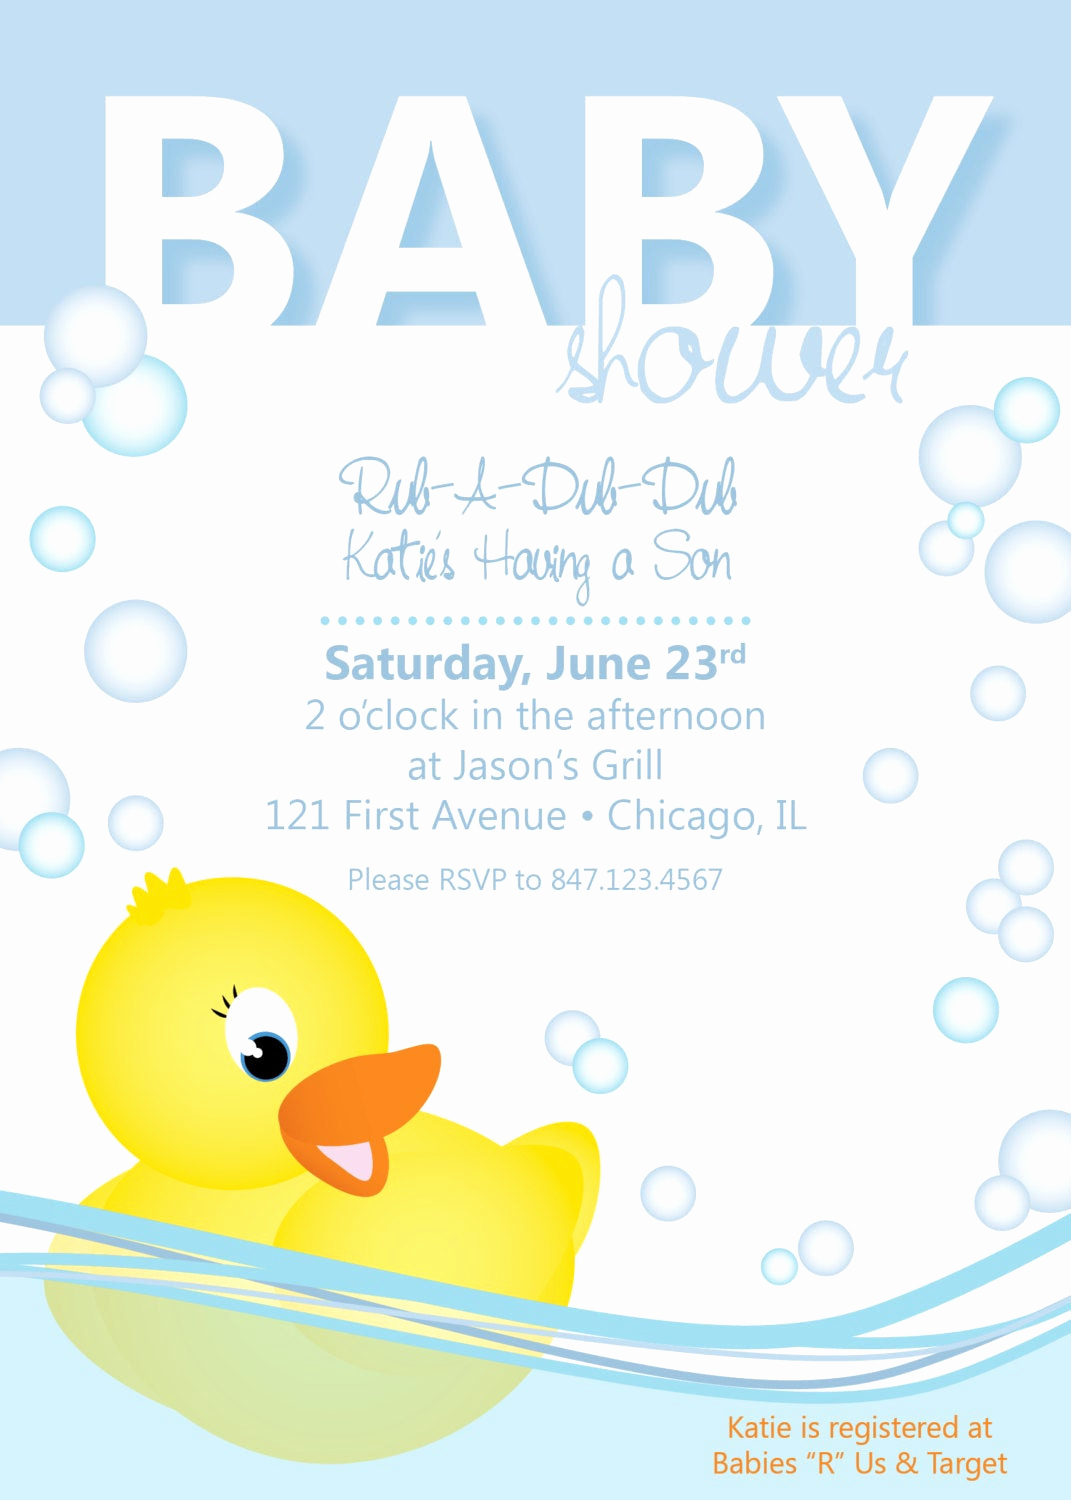 Duck Baby Shower Invitation Templates Awesome Baby Shower Invitation Rubber Ducky by Collidestudio On Etsy